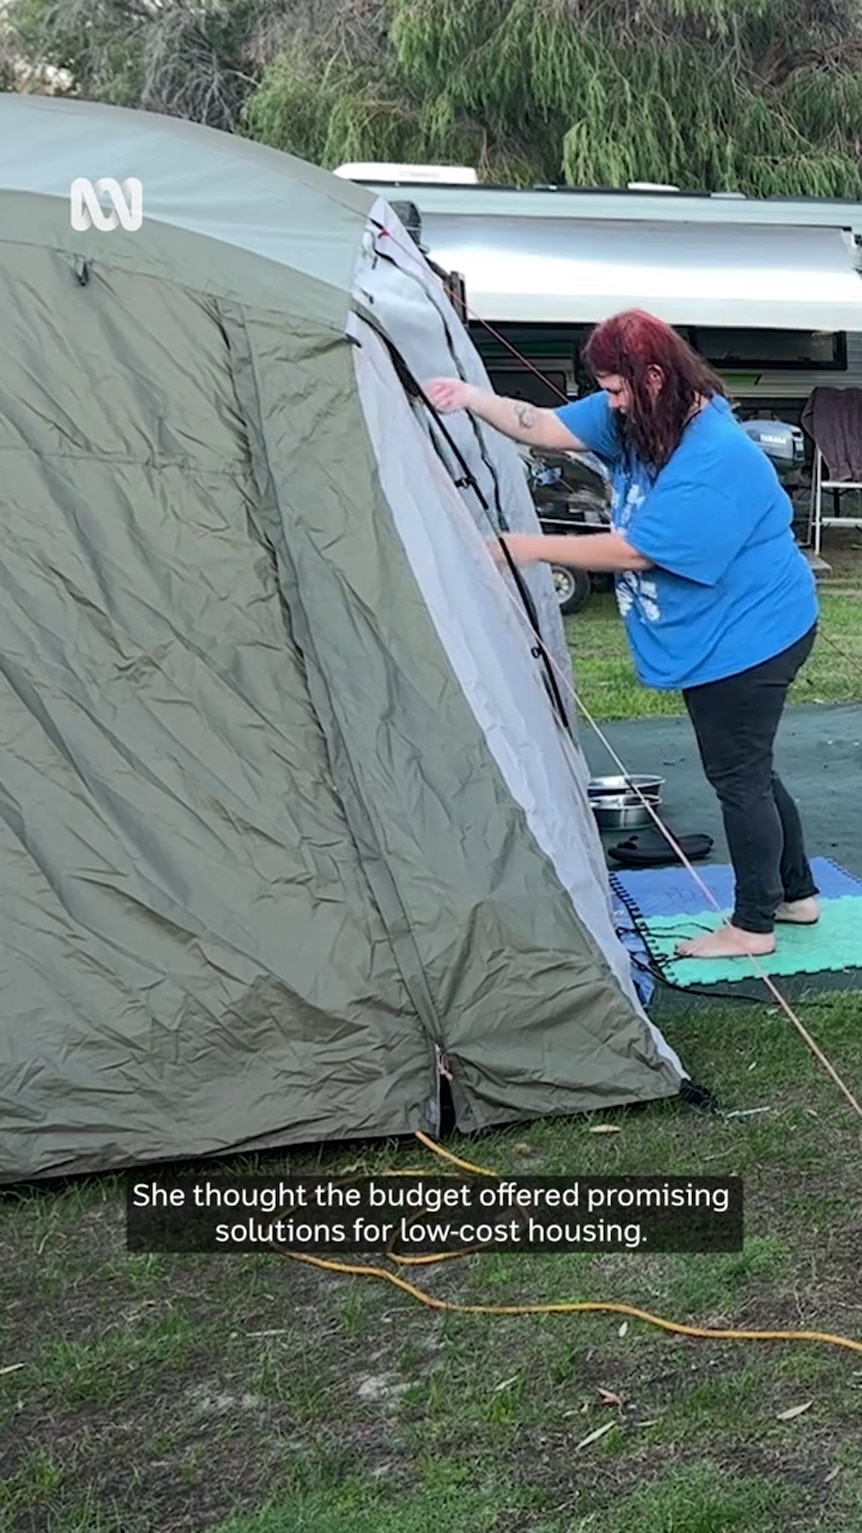 A woman in a large blue t-shirt reaches towards a tent 